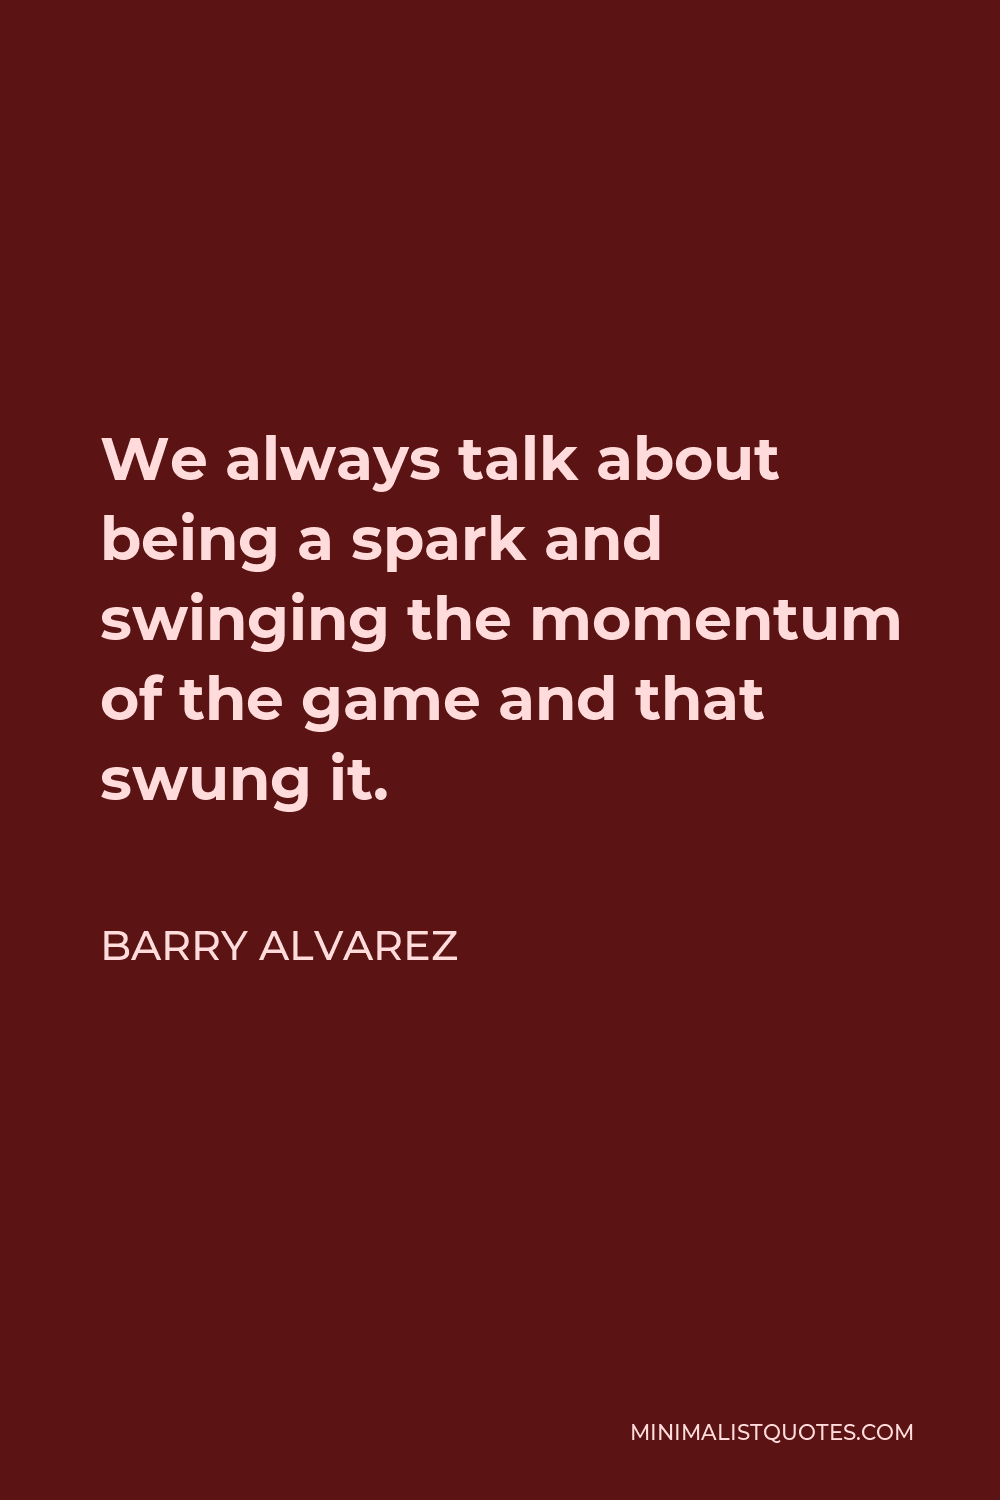 Barry Alvarez Quote - We always talk about being a spark and swinging the momentum of the game and that swung it.